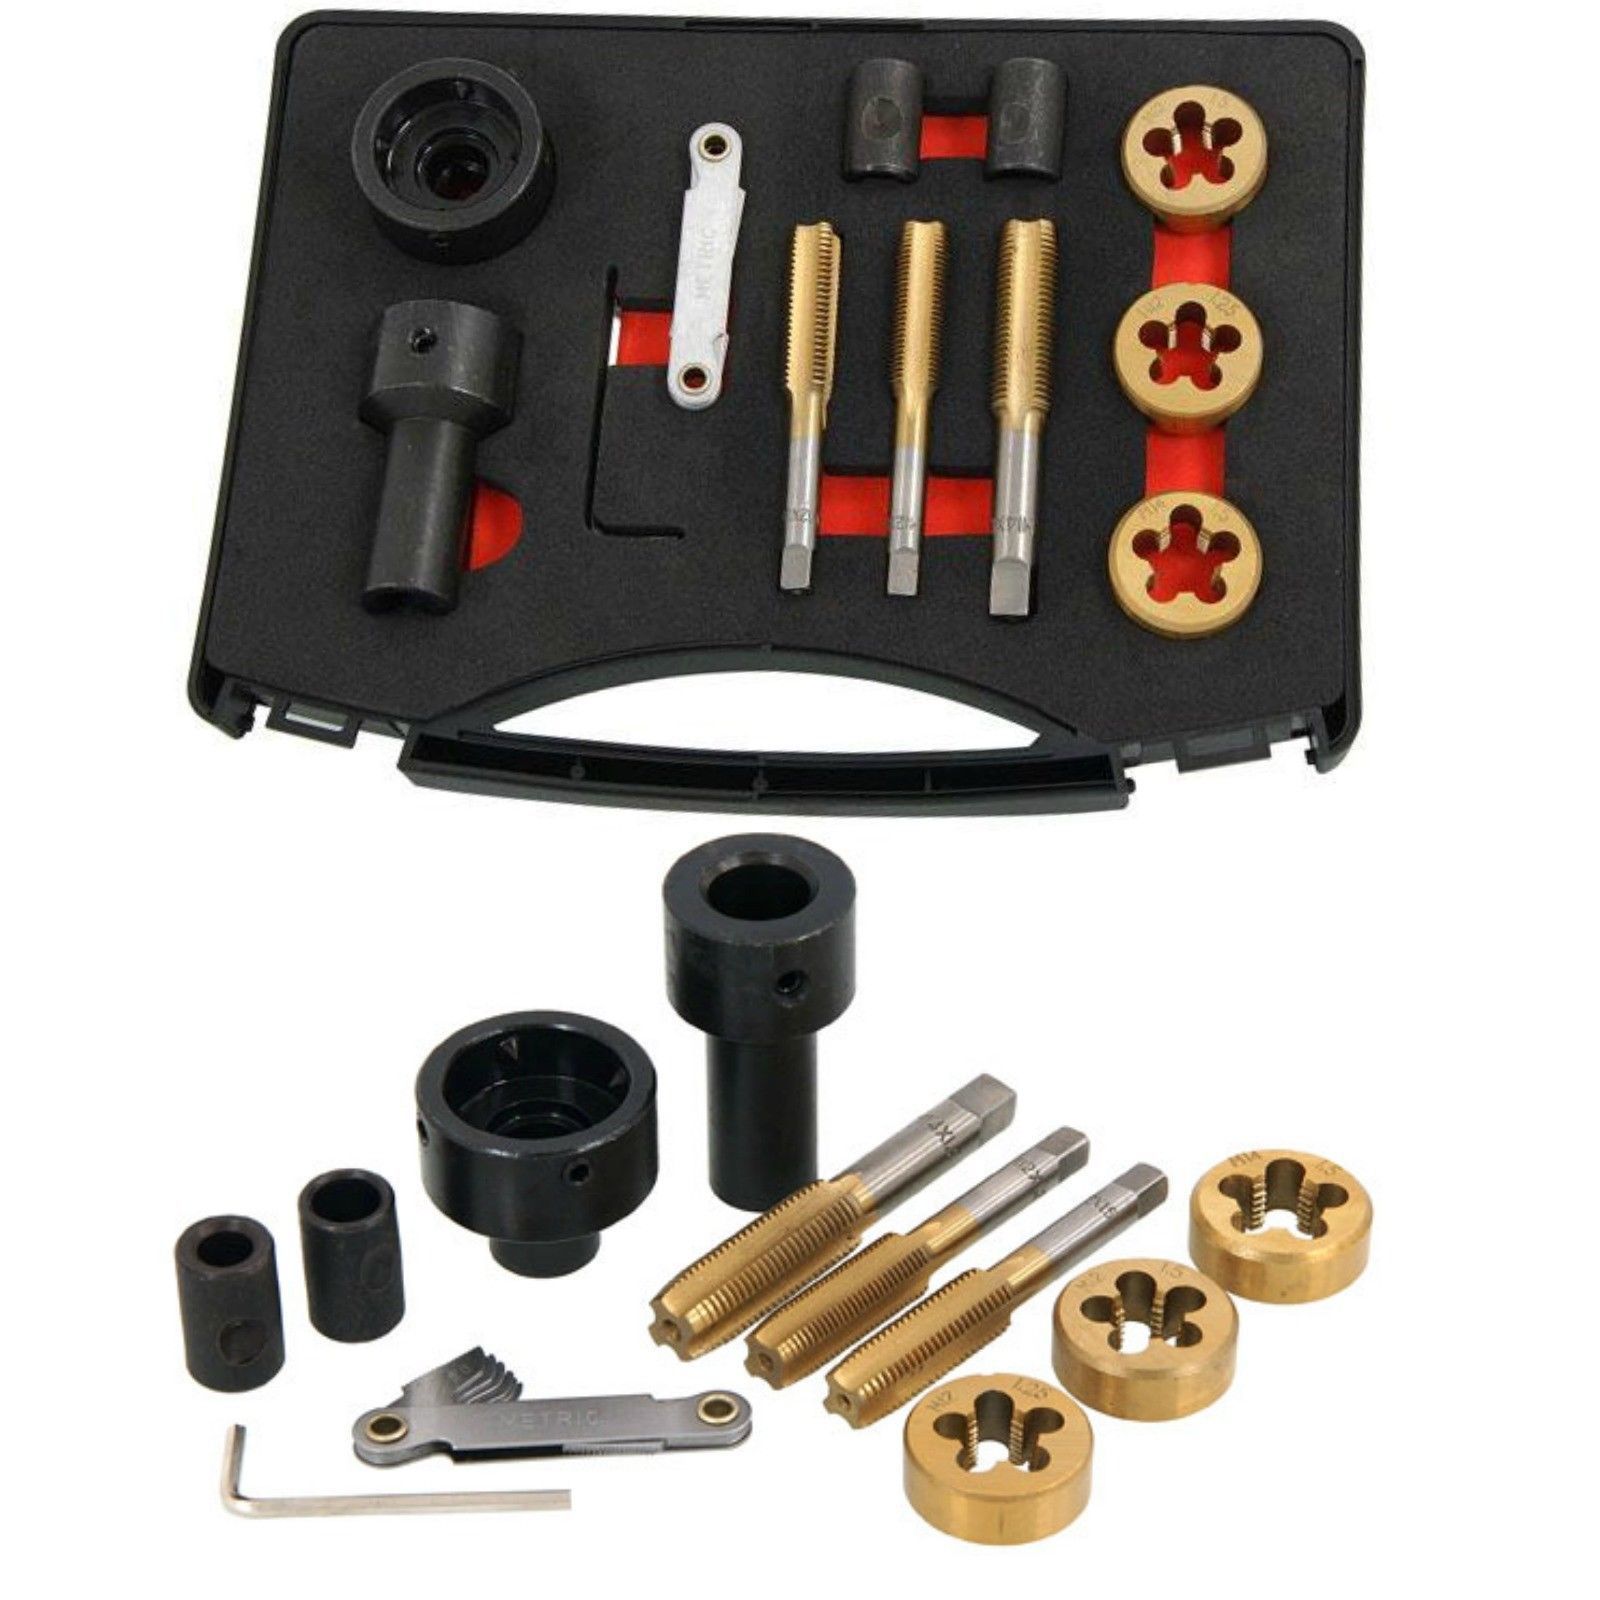 12pcs Tap & Die Set For Wheel Studs & Nuts Rethreads Cleans Restore Re-cuts